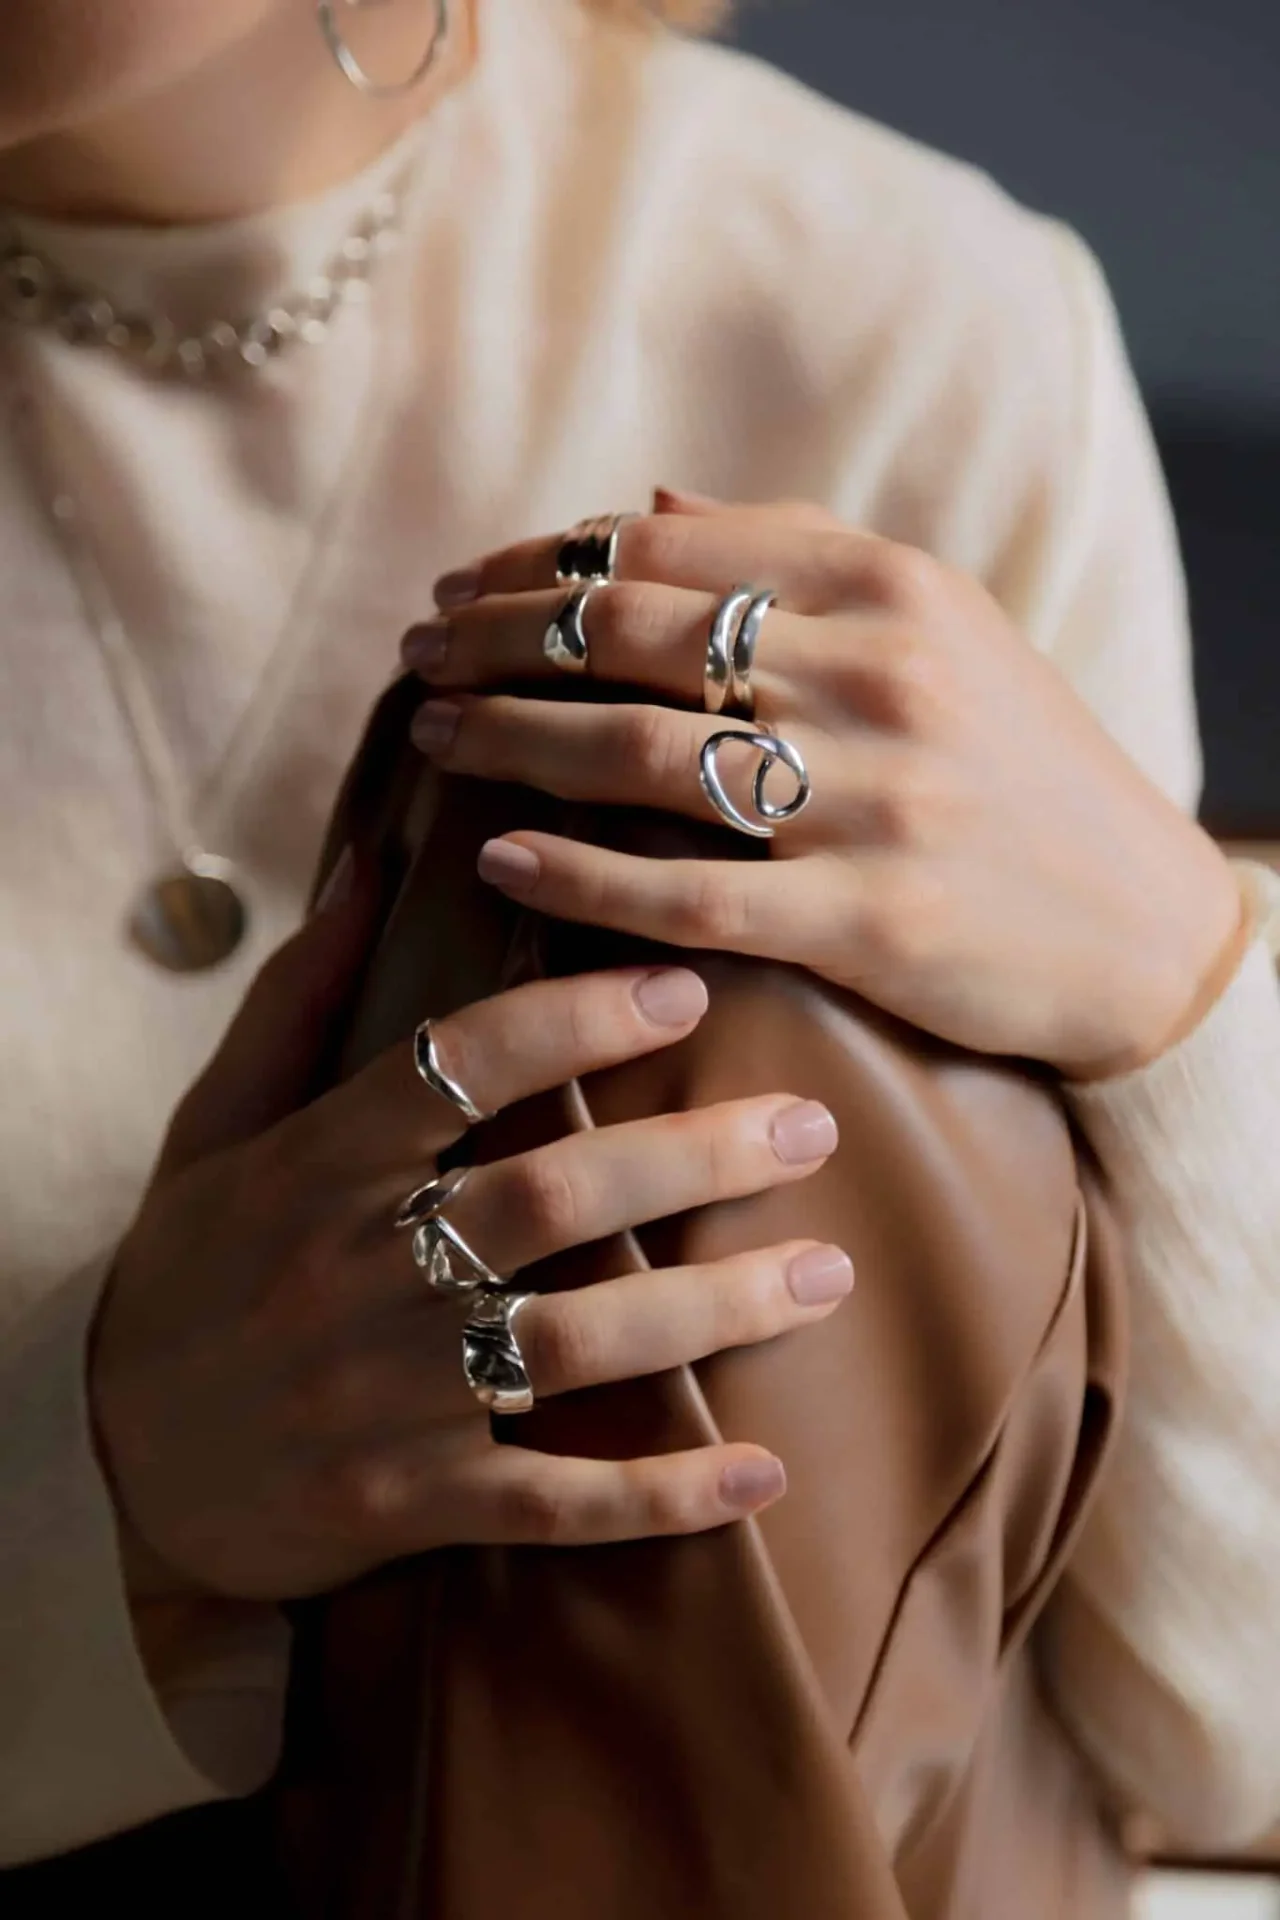 Big Ring Accessorising Mistakes And How To Avoid Them